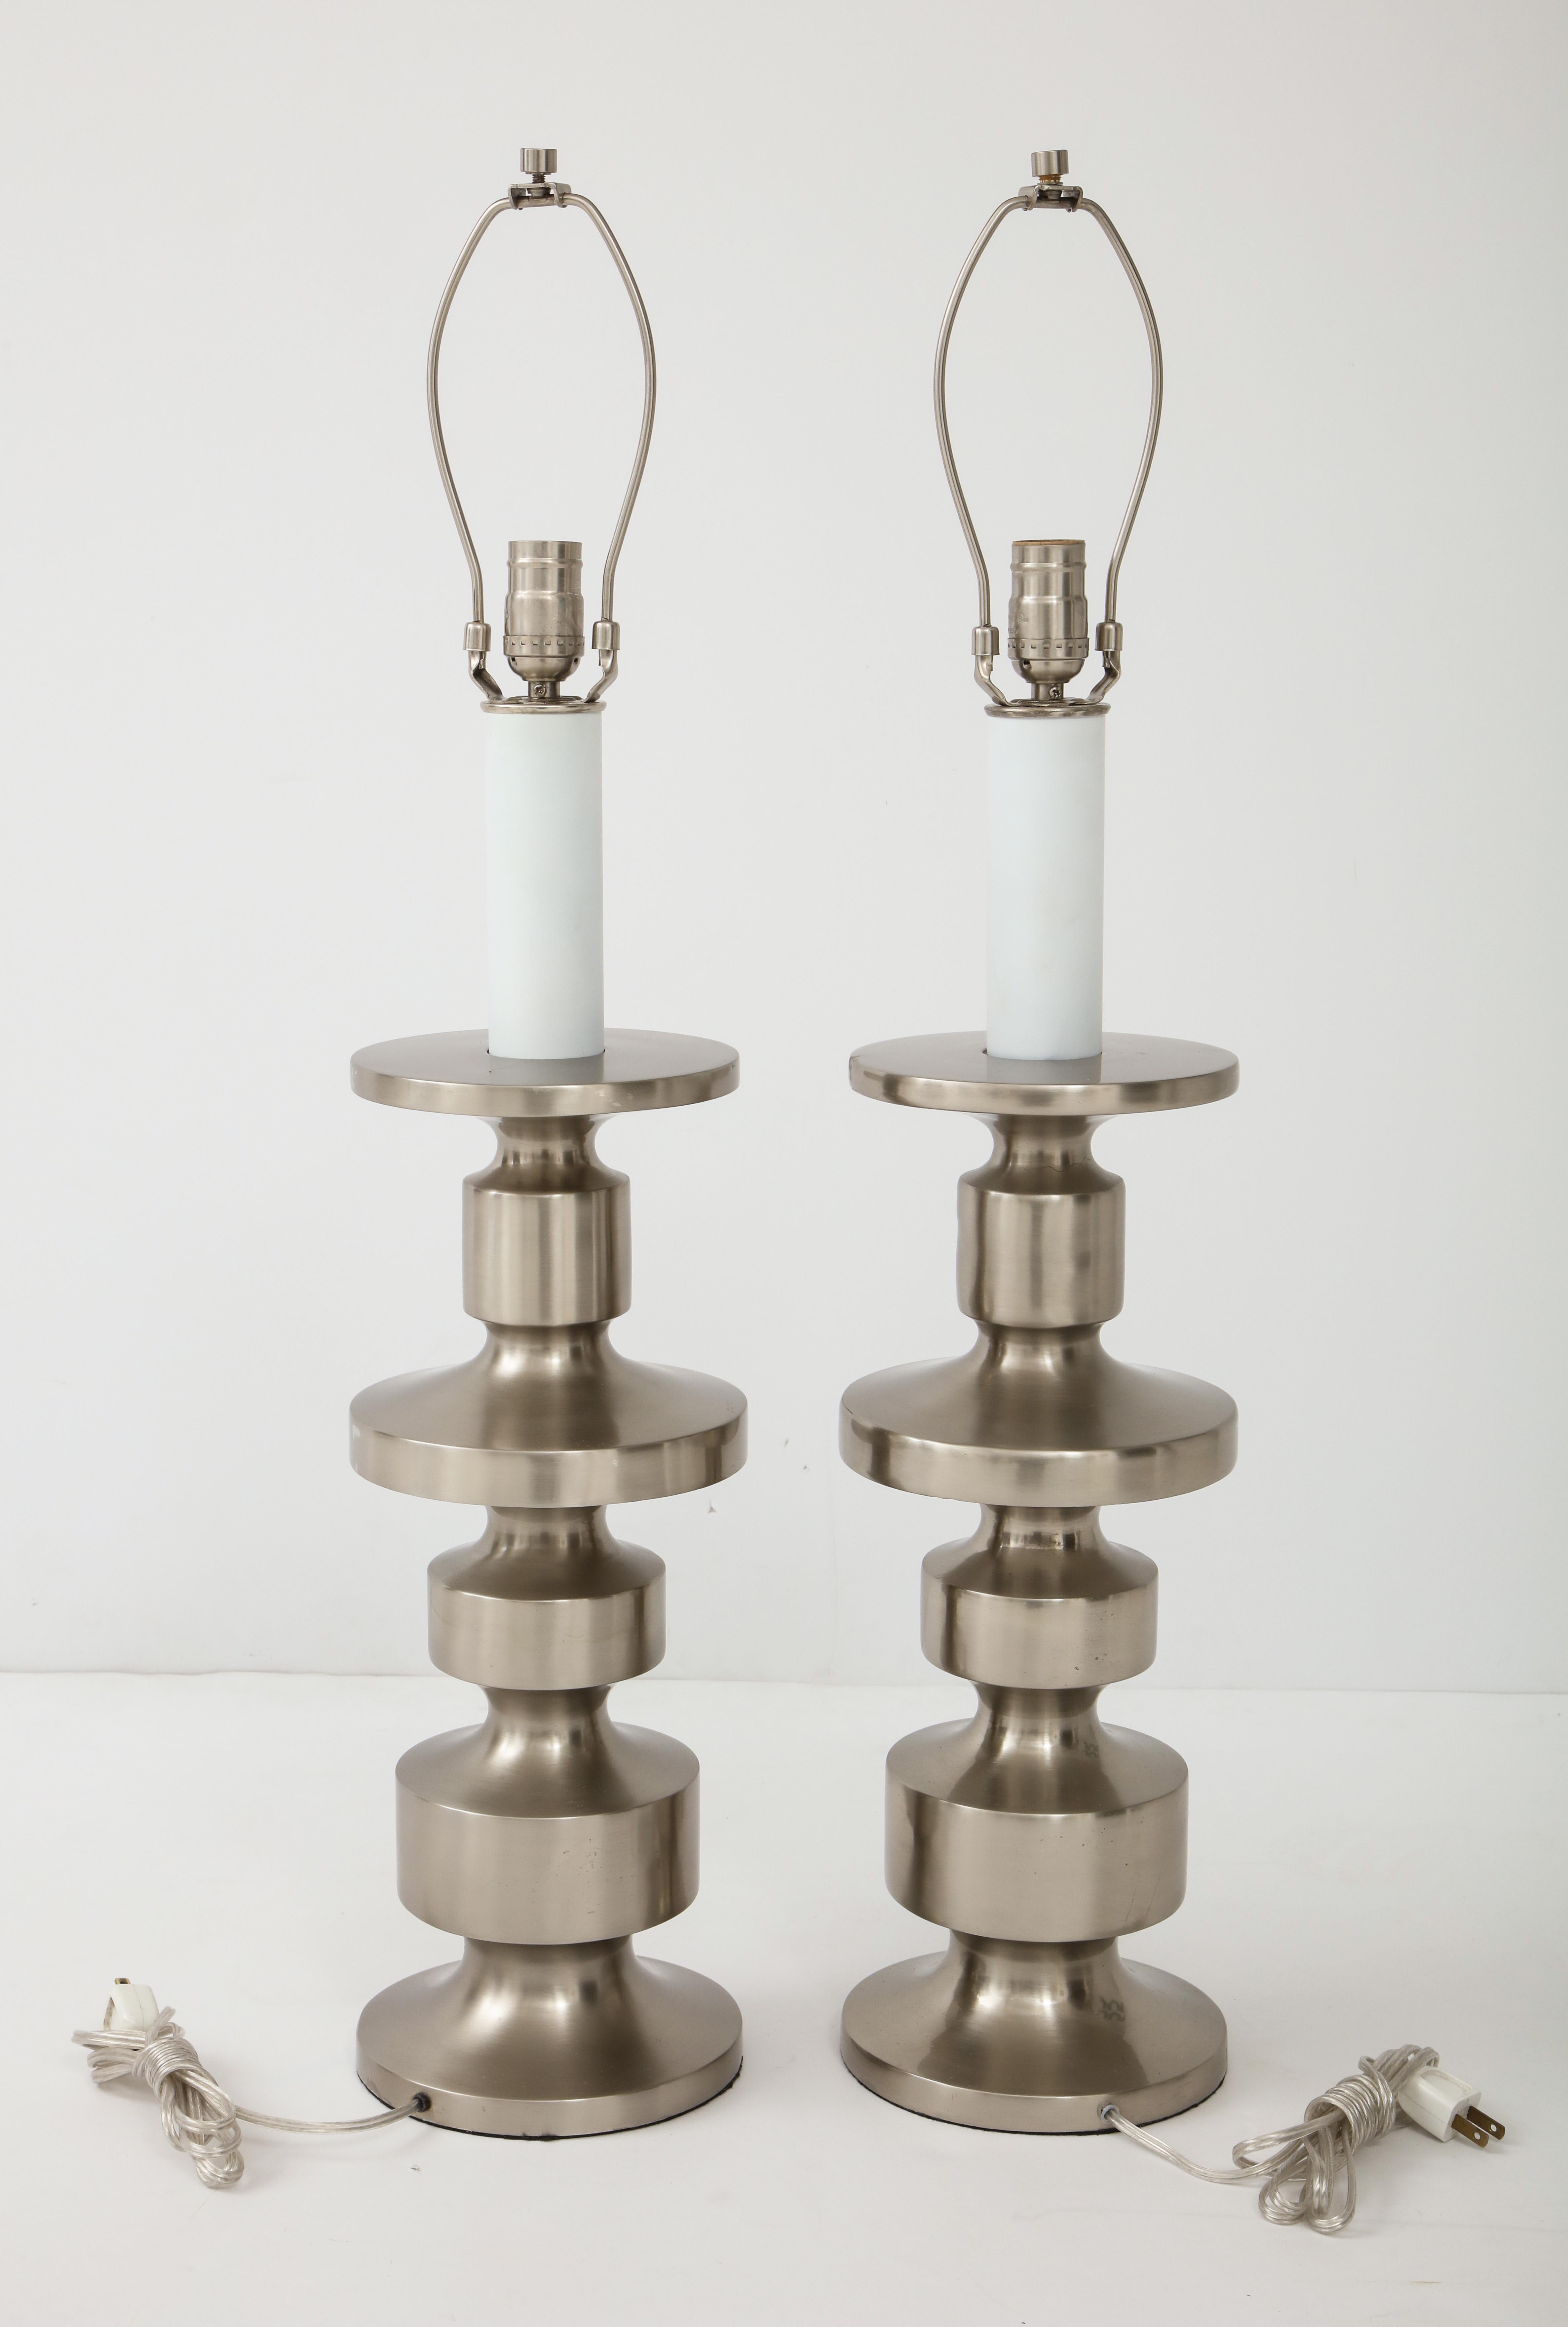 Pair of midcentury brushed steel TOTEM form lamps. Lamps have been rewired for use in the USA.